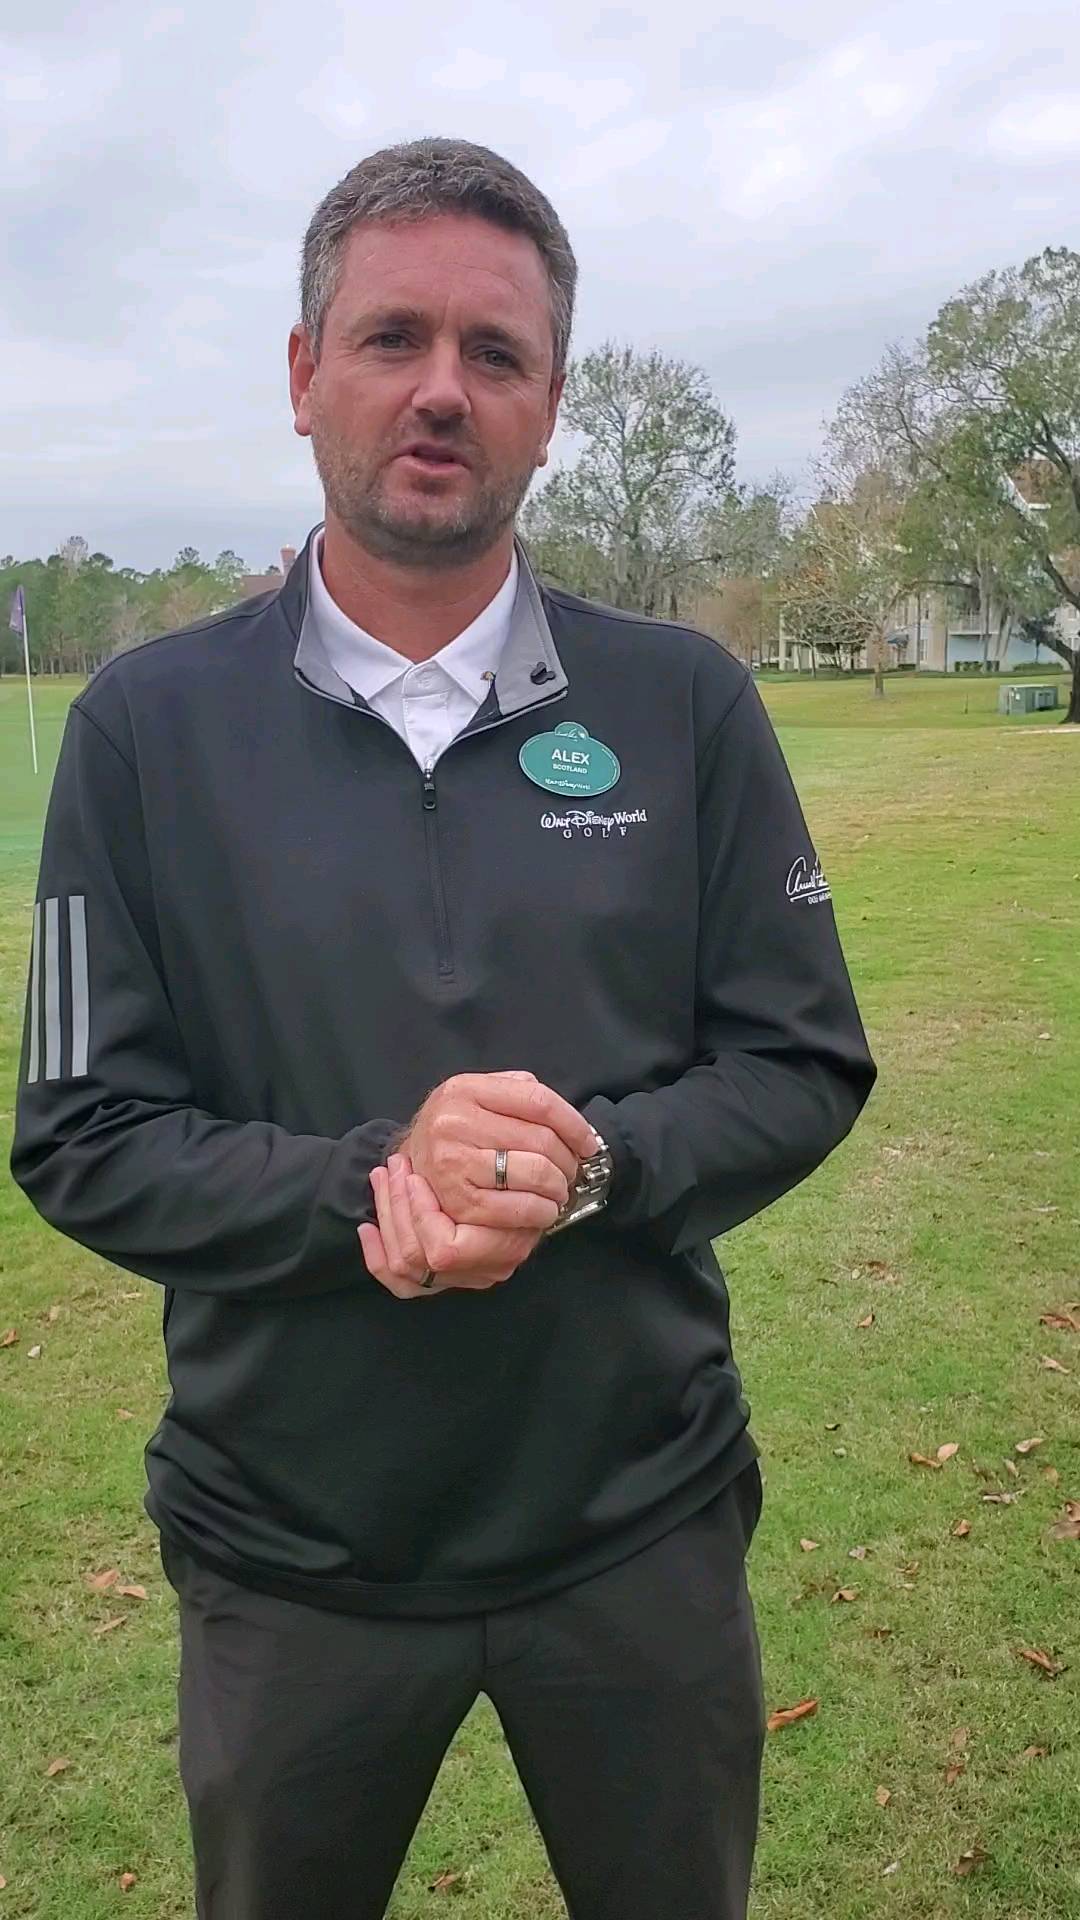 First round of GWAA Championship at Lake Buena Vista golf course. Director of Golf, Alex gives a review of the course and what is happening at Disney Golf. A brief downpour mid round could not dampen our spirits or pace of play. Let's go!!! #Golf #golfcontentnetwork #instagolf #Disney Golf #disney #disneyworld #golflife #gwaa #golfstagram #florida #orlando #scotland #visitscotland #disneysprings #golfing #couplegoals #instacool